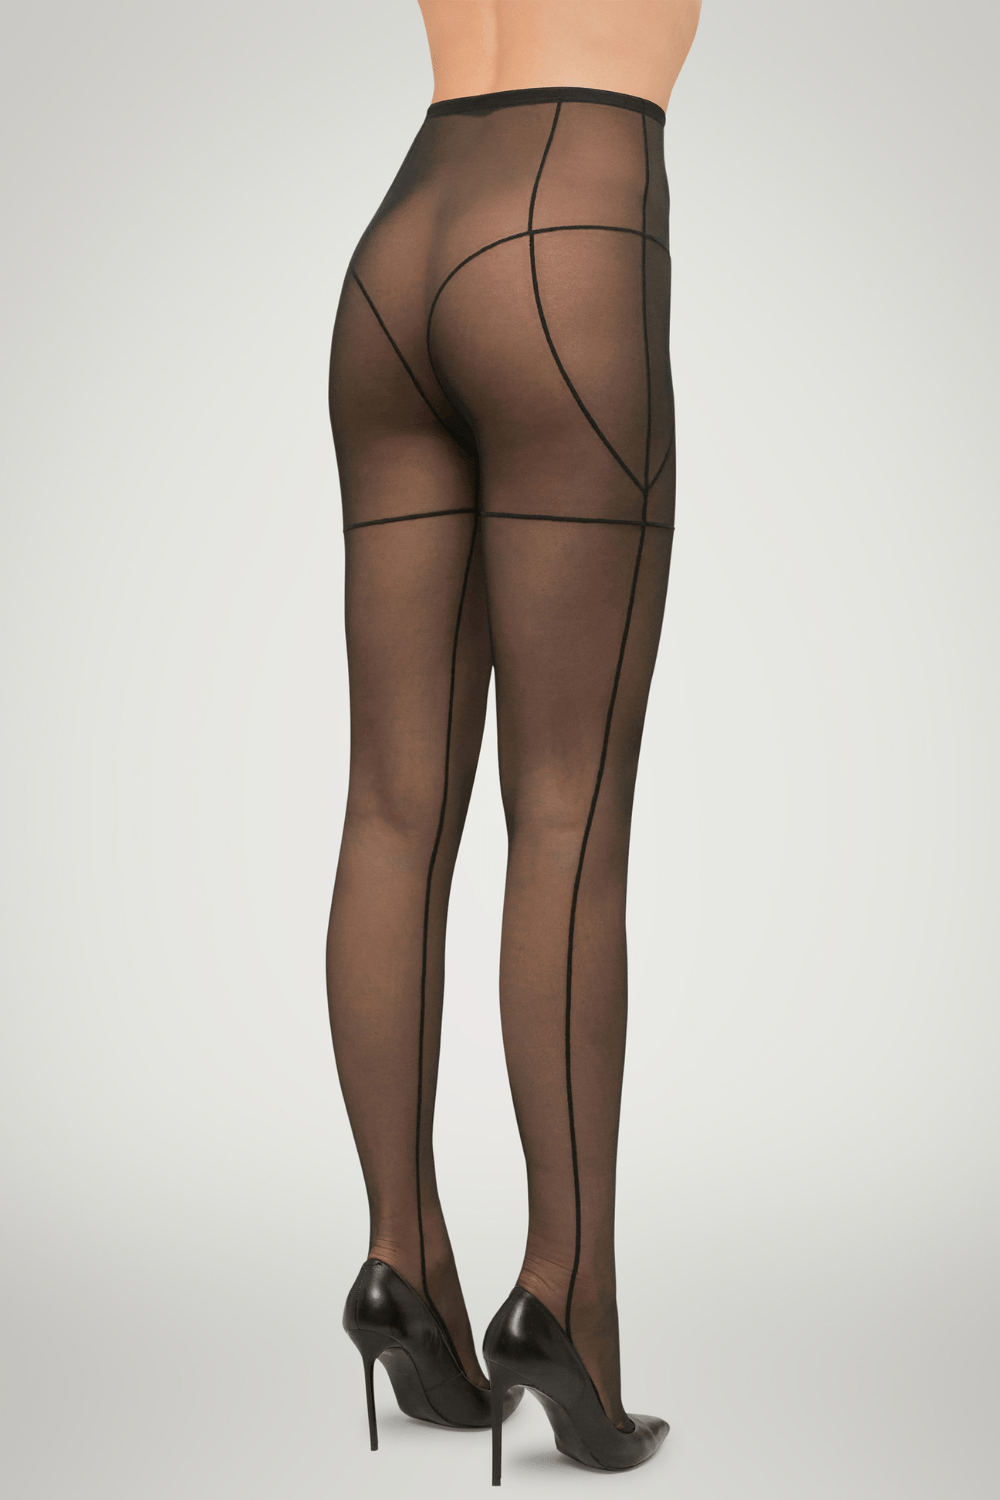 Wolford Tulle Tights Black – Naughty Knickers